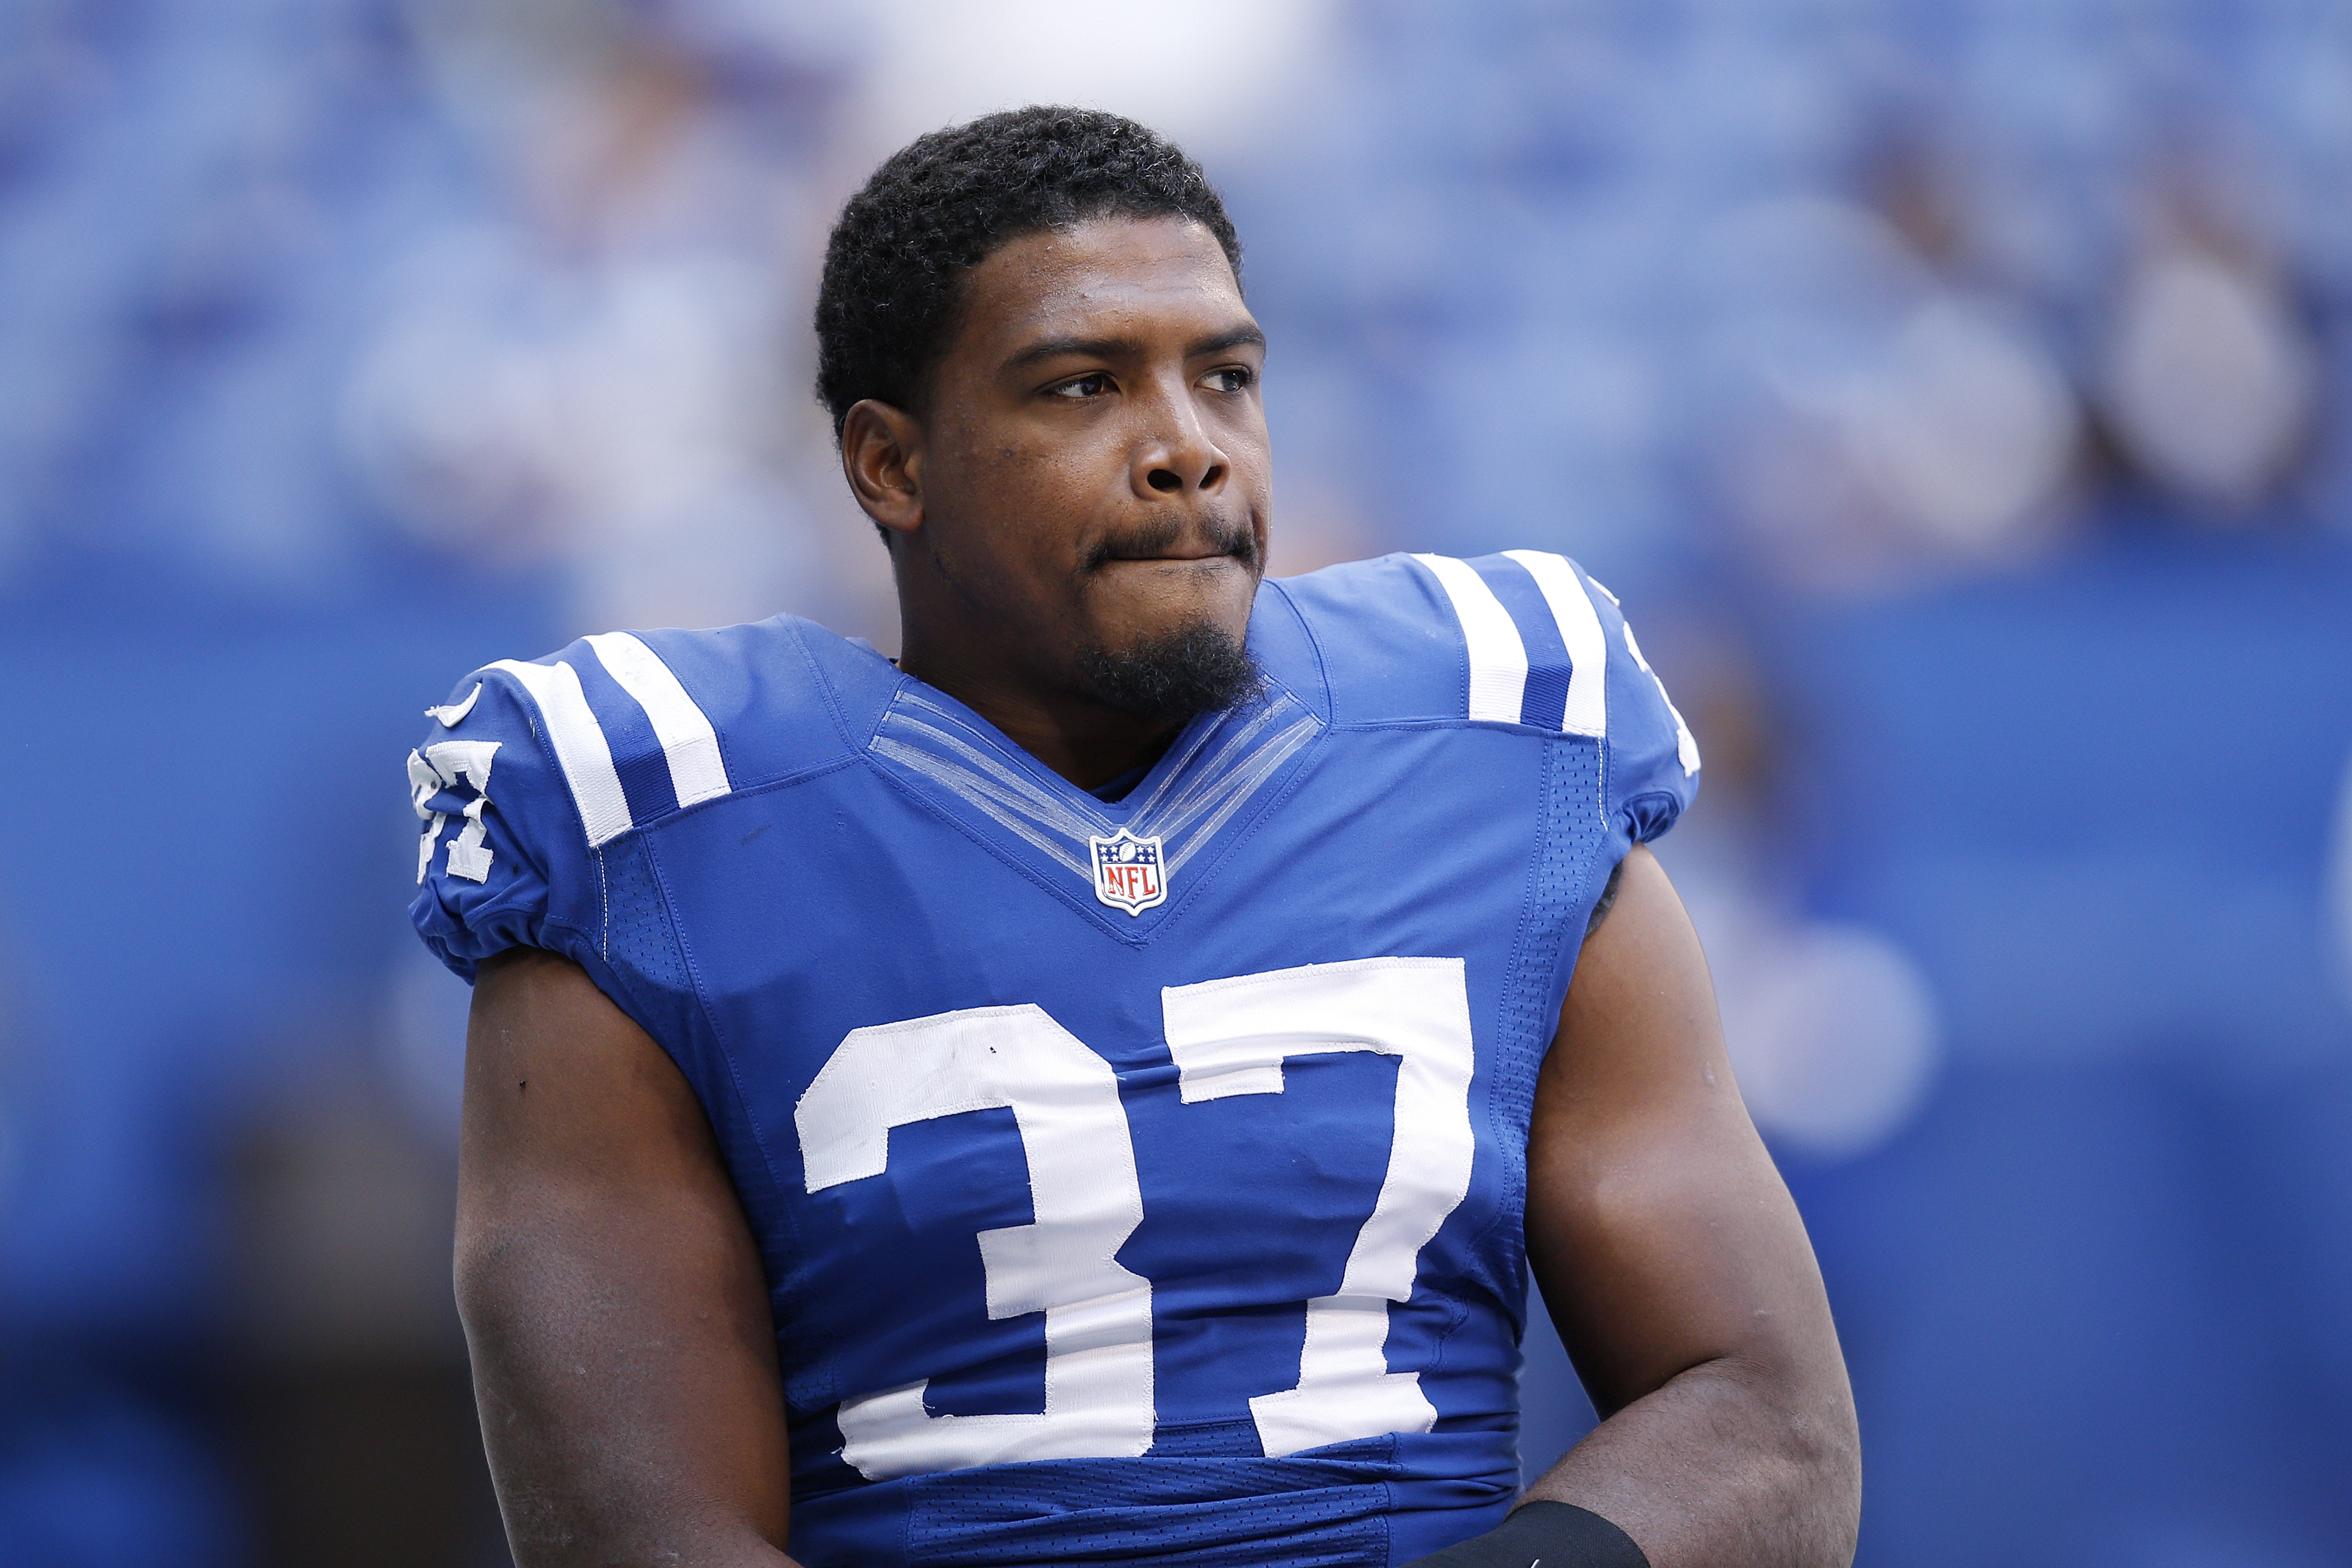 Zurlon Tipton of the Indianapolis Colts looks on during a game against the New Orleans Saints at Lucas Oil Stadium in Indianapolis on Oct. 25, 2015 (Joe Robbins—Getty Images)